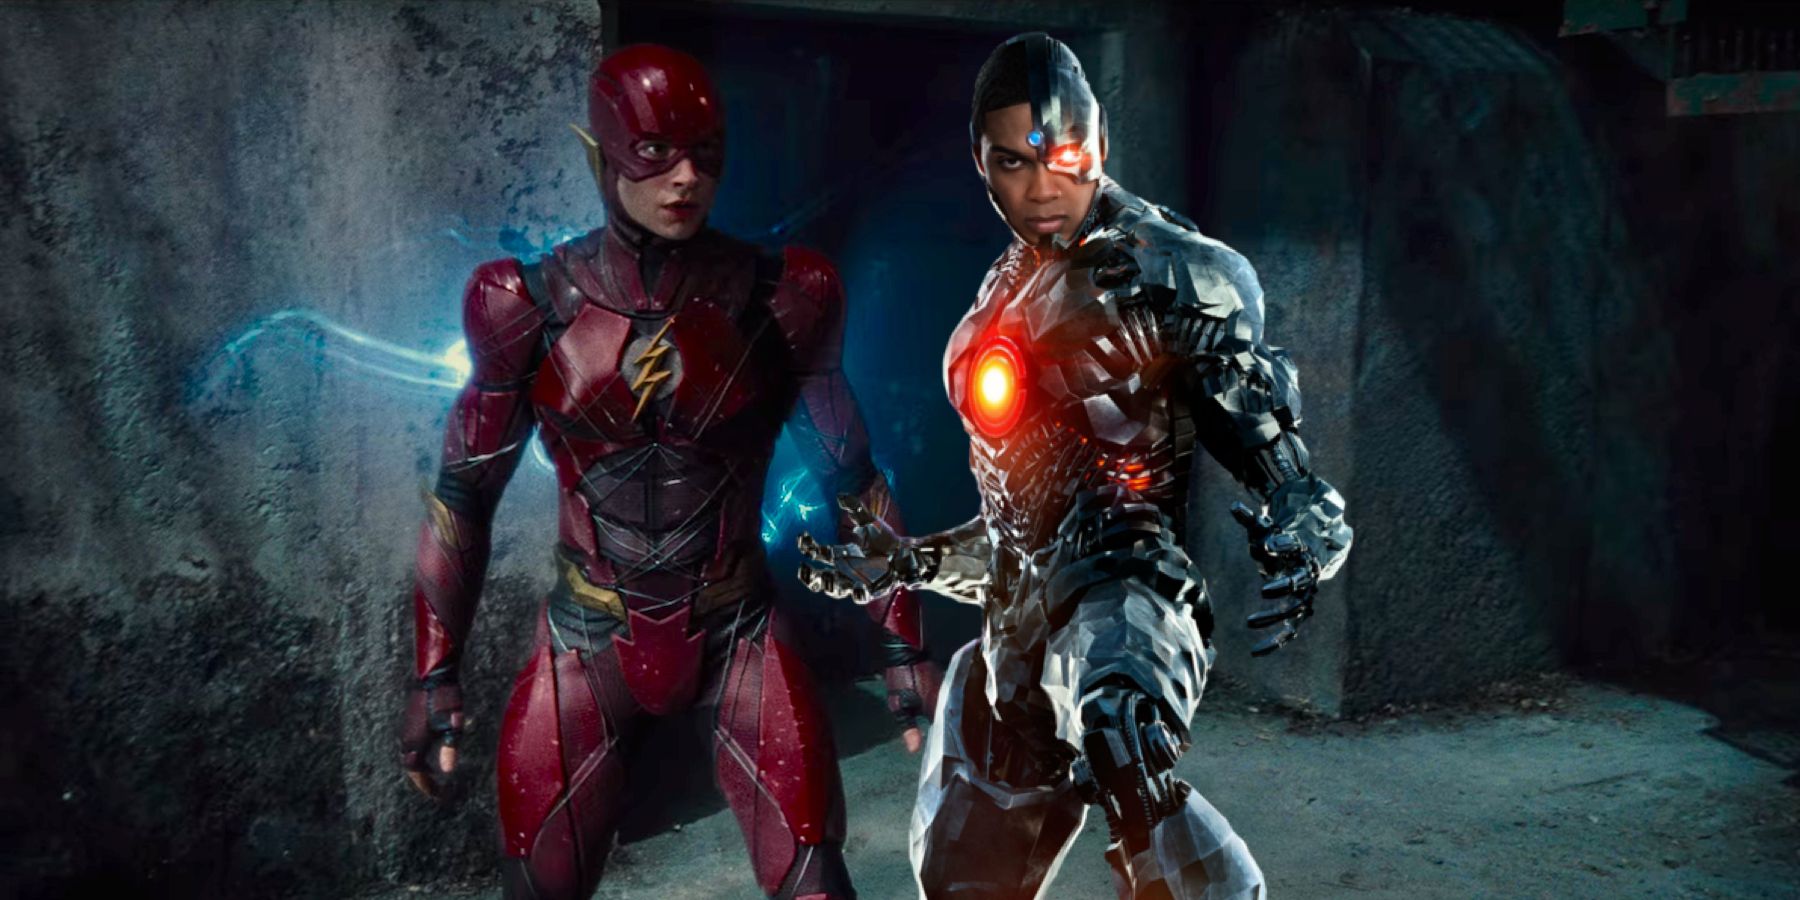 The Flash and Cyborg in Justice League